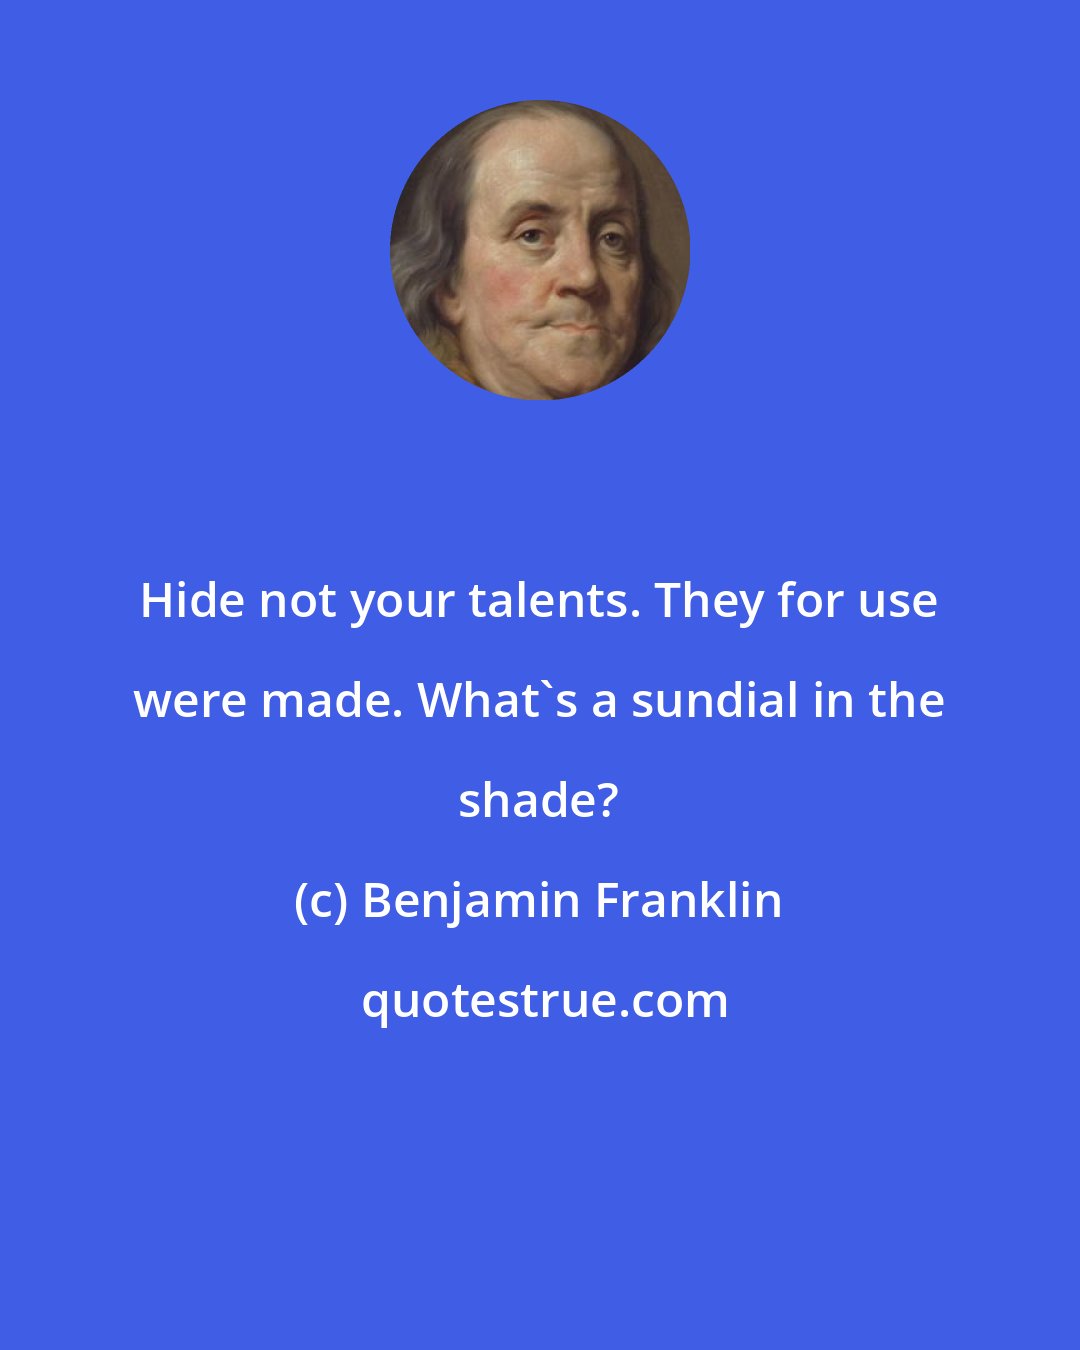 Benjamin Franklin: Hide not your talents. They for use were made. What's a sundial in the shade?